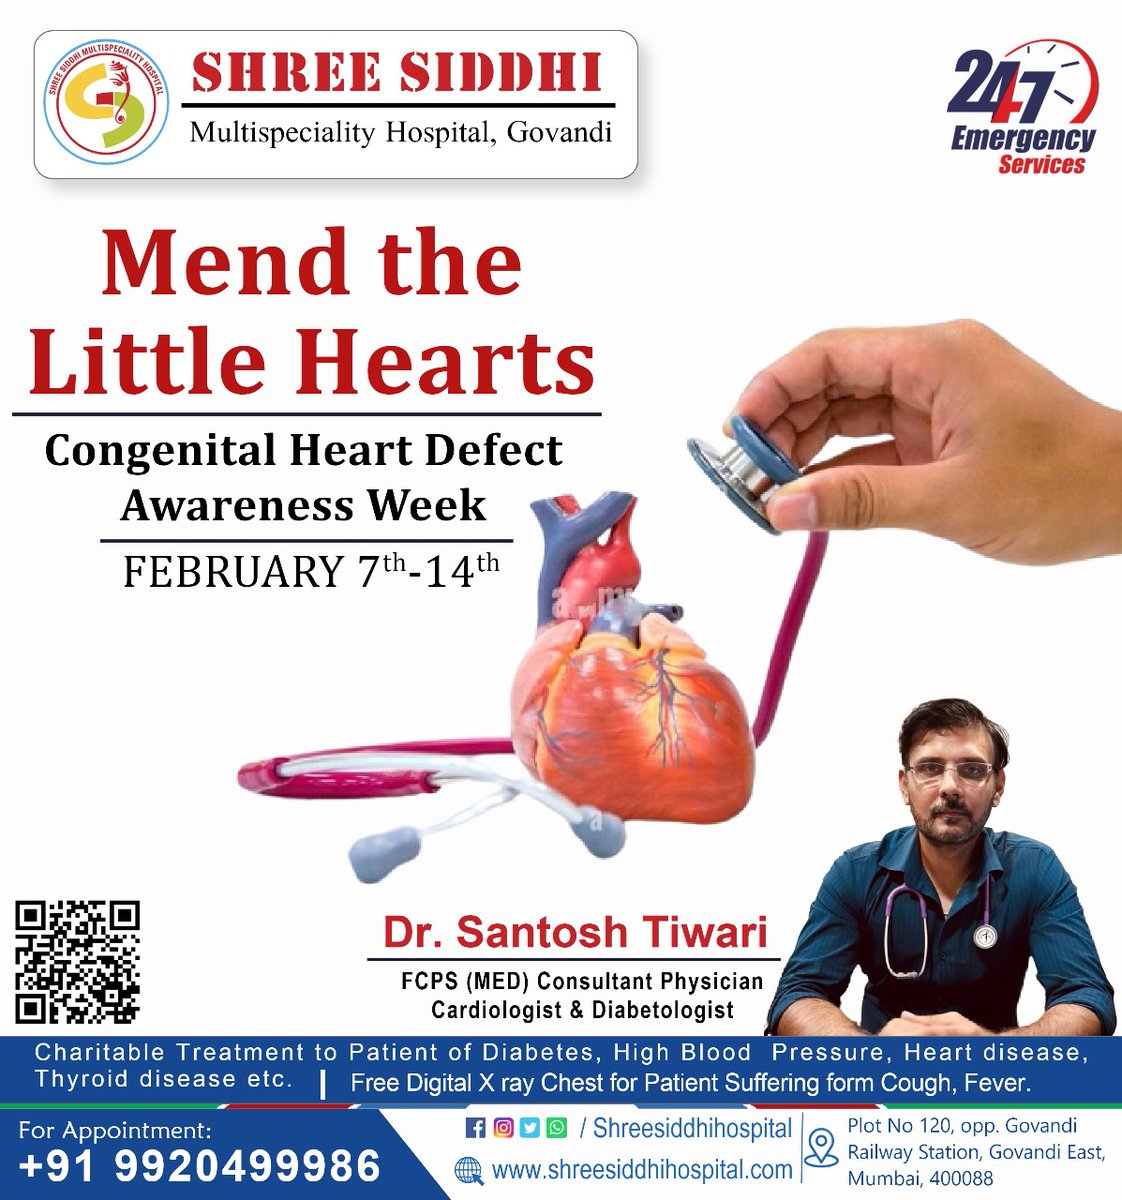 Congenital heart defects (CHDs)
Contact to Shree Siddhi Hospital 
Dr. Santosh Tiwari
FCPS (MED) Consultant Physician Cardiologist & Diabetologist

992049986
shreesiddhihospital.com

#congenitalheartdefects #CHDS #shreesiddhihospital #cardiology